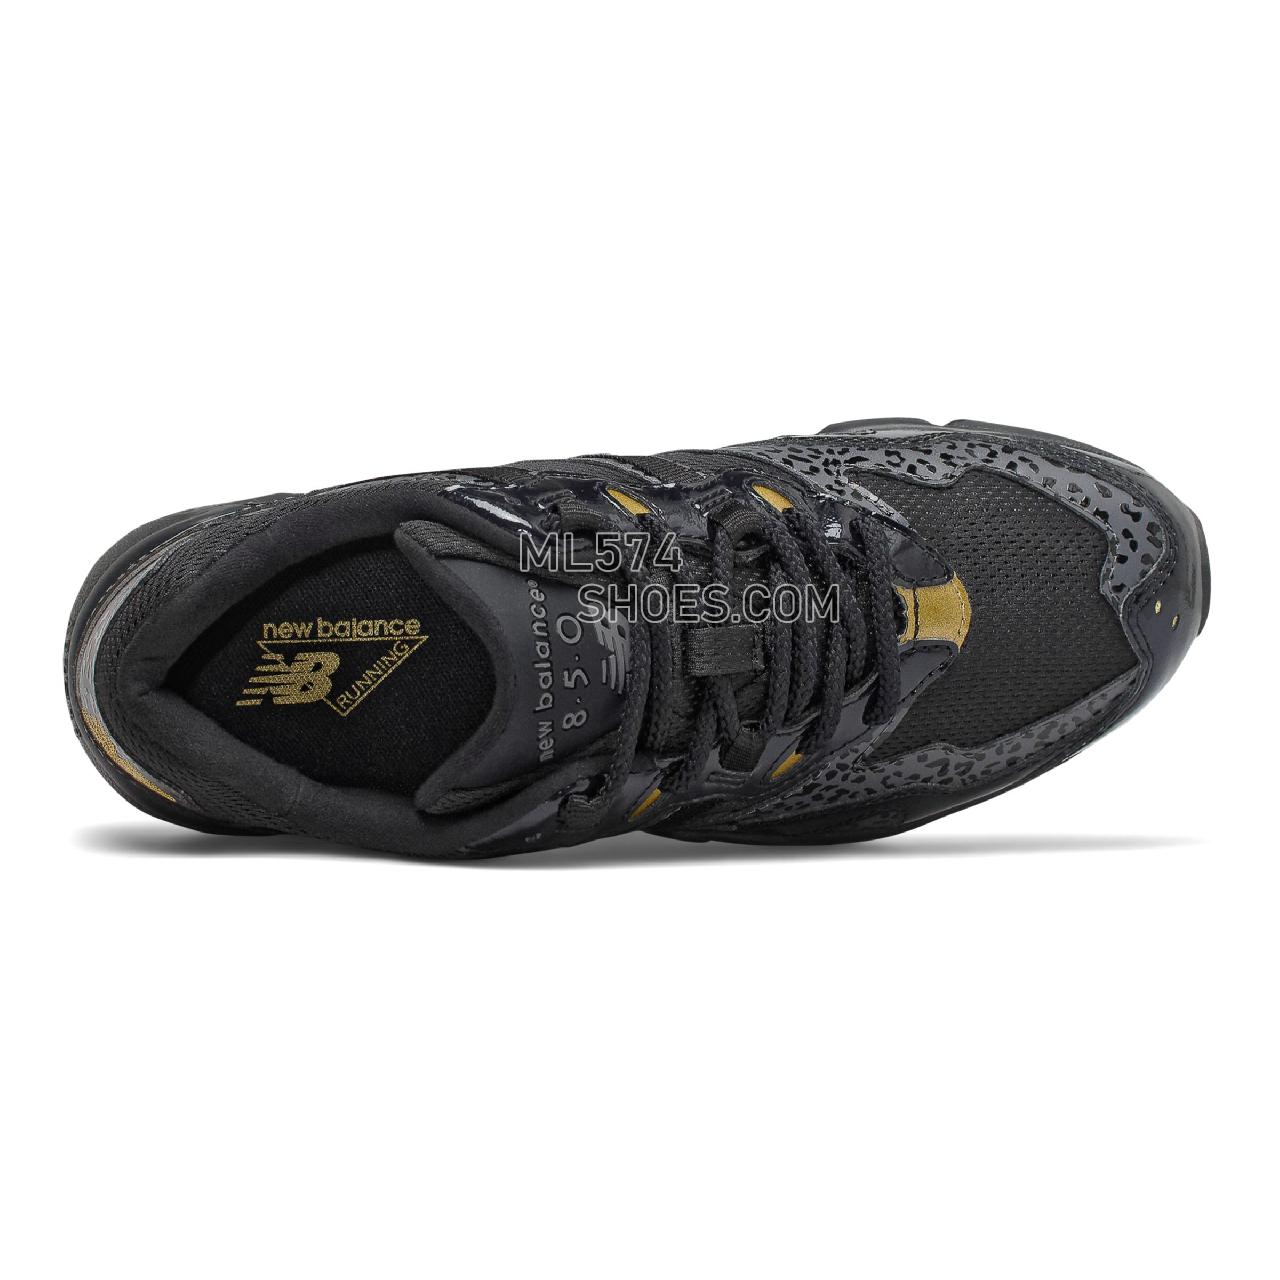 New Balance 850 - Women's Whats Trending - Black with Gold - WL850LBD